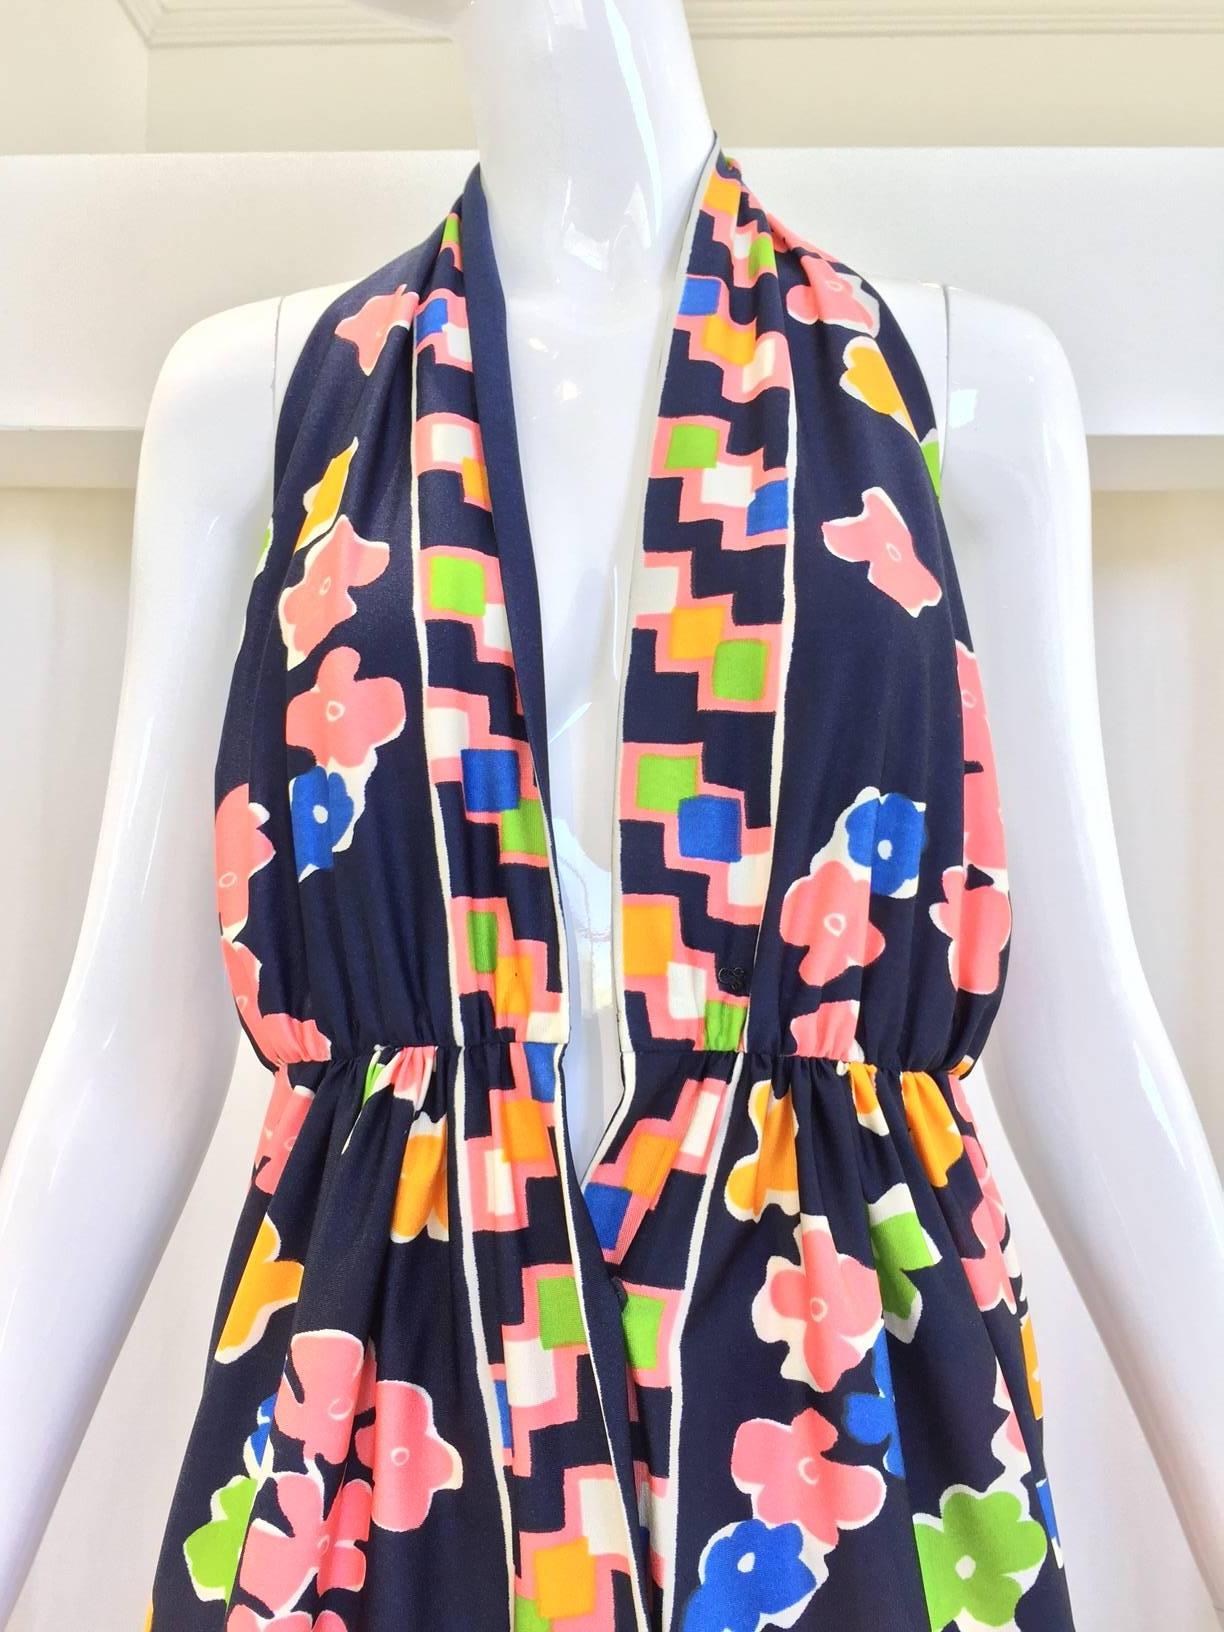 What a fun summer jersey halter dress from vintage Oscar De La Renta. Navy blue color with chartruese , peach pink, yellow floral print halter dress. perfect for summer vacation at st.barth! wrinkle resistant.
Bust: 36